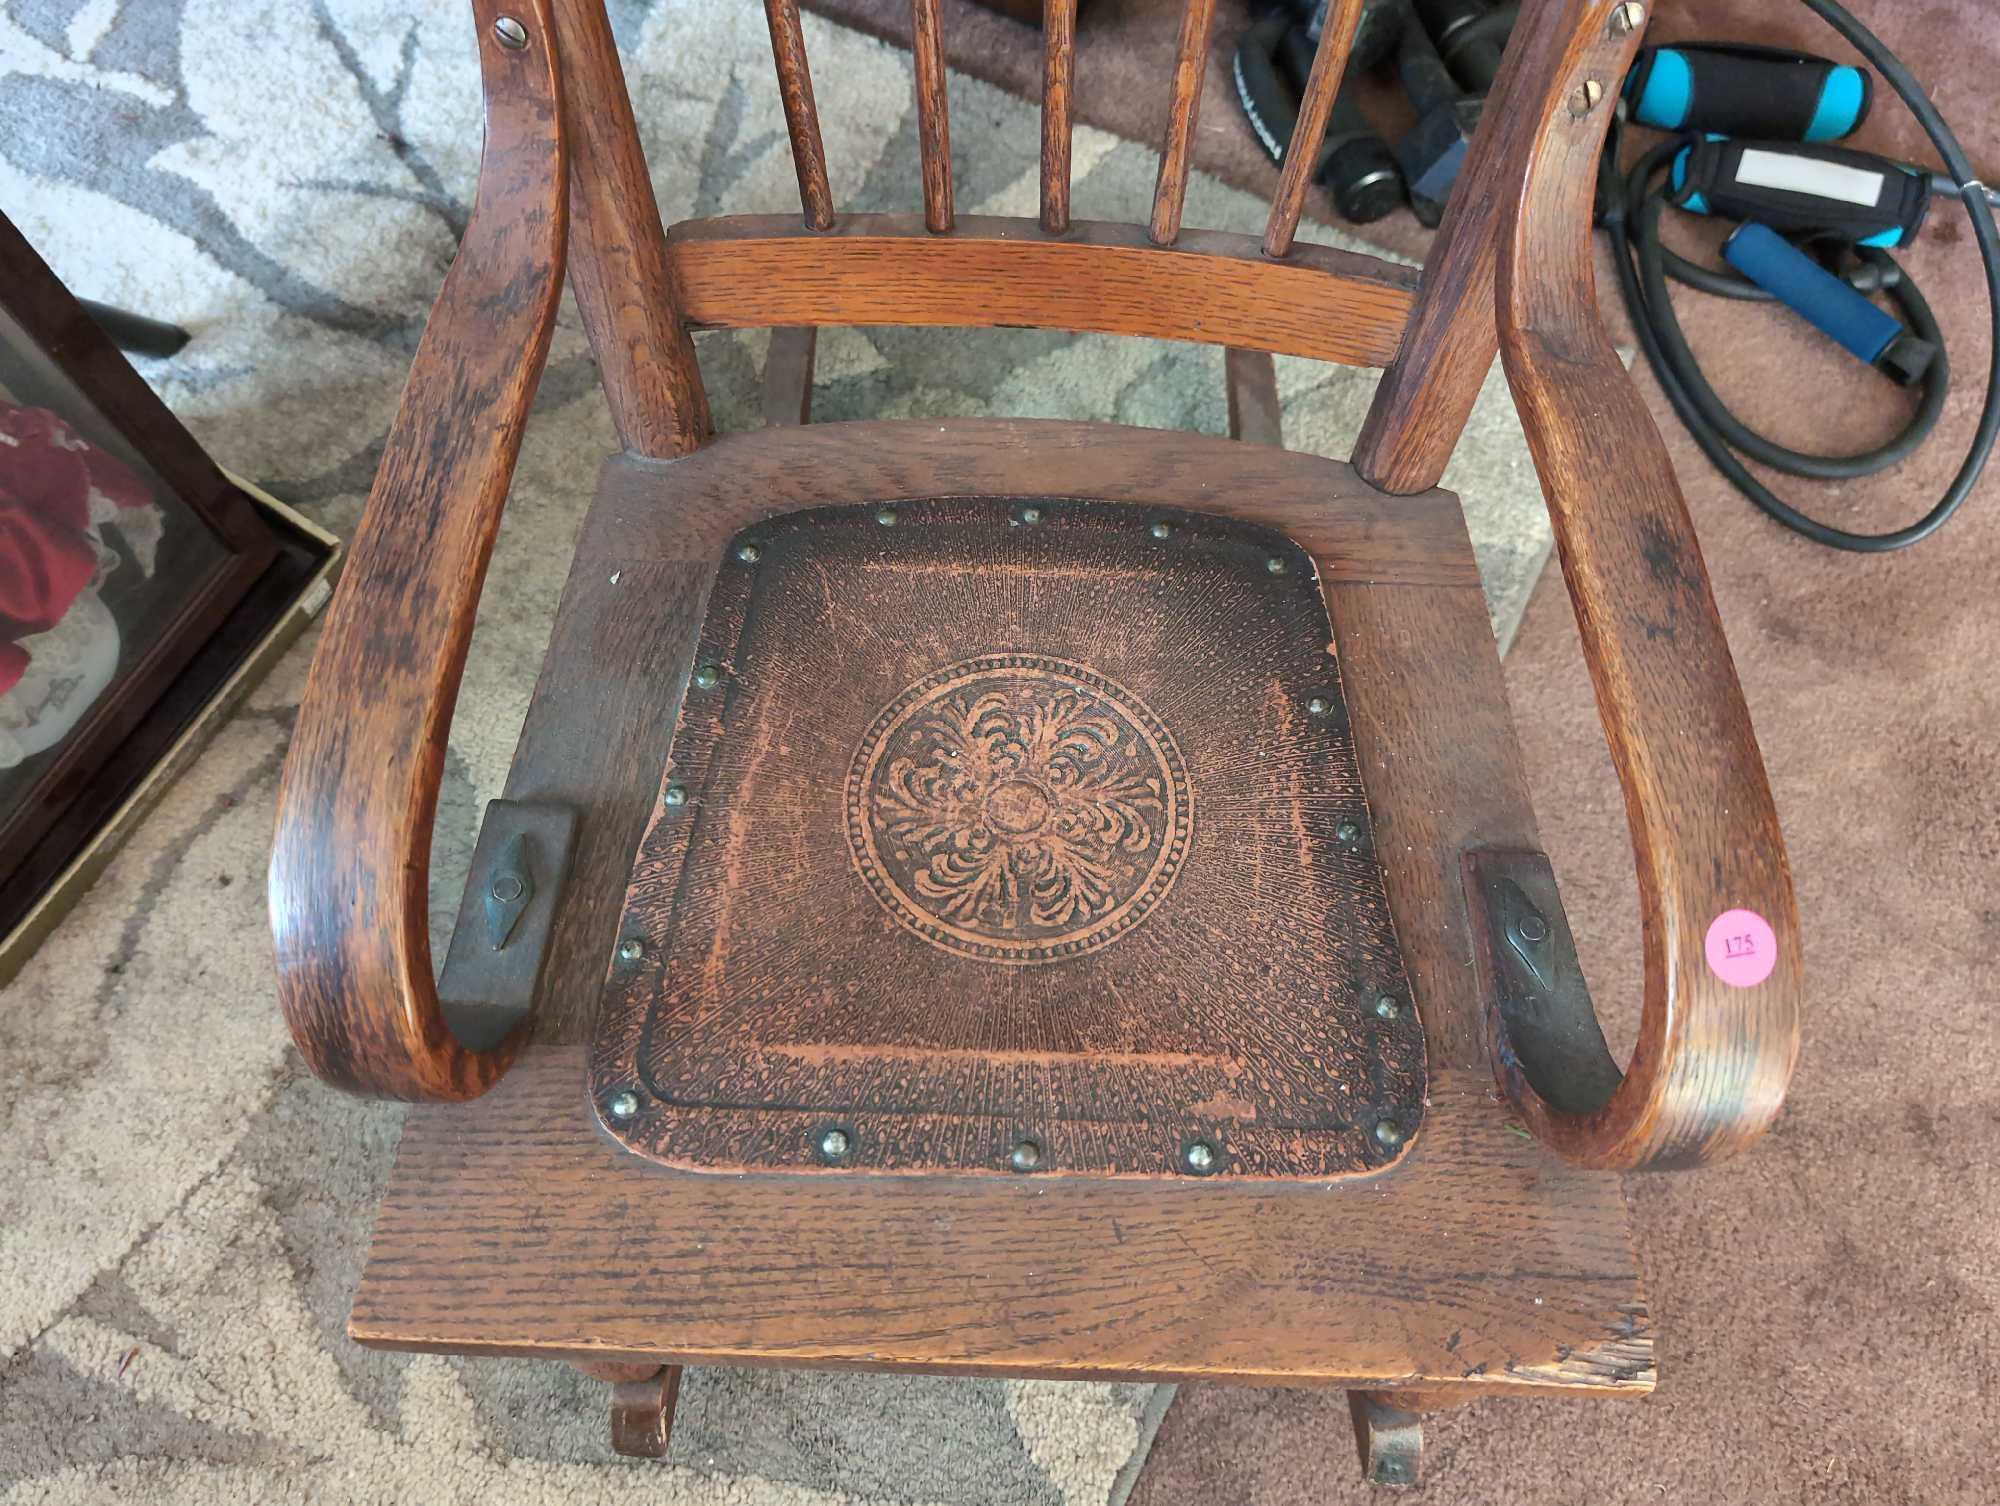 (LR) ANTIQUE OAK SPINDLE BACK CHILD'S ROCKING CHAIR WITH TOOLED LEATHER SEAT, NAIL HEAD TRIM